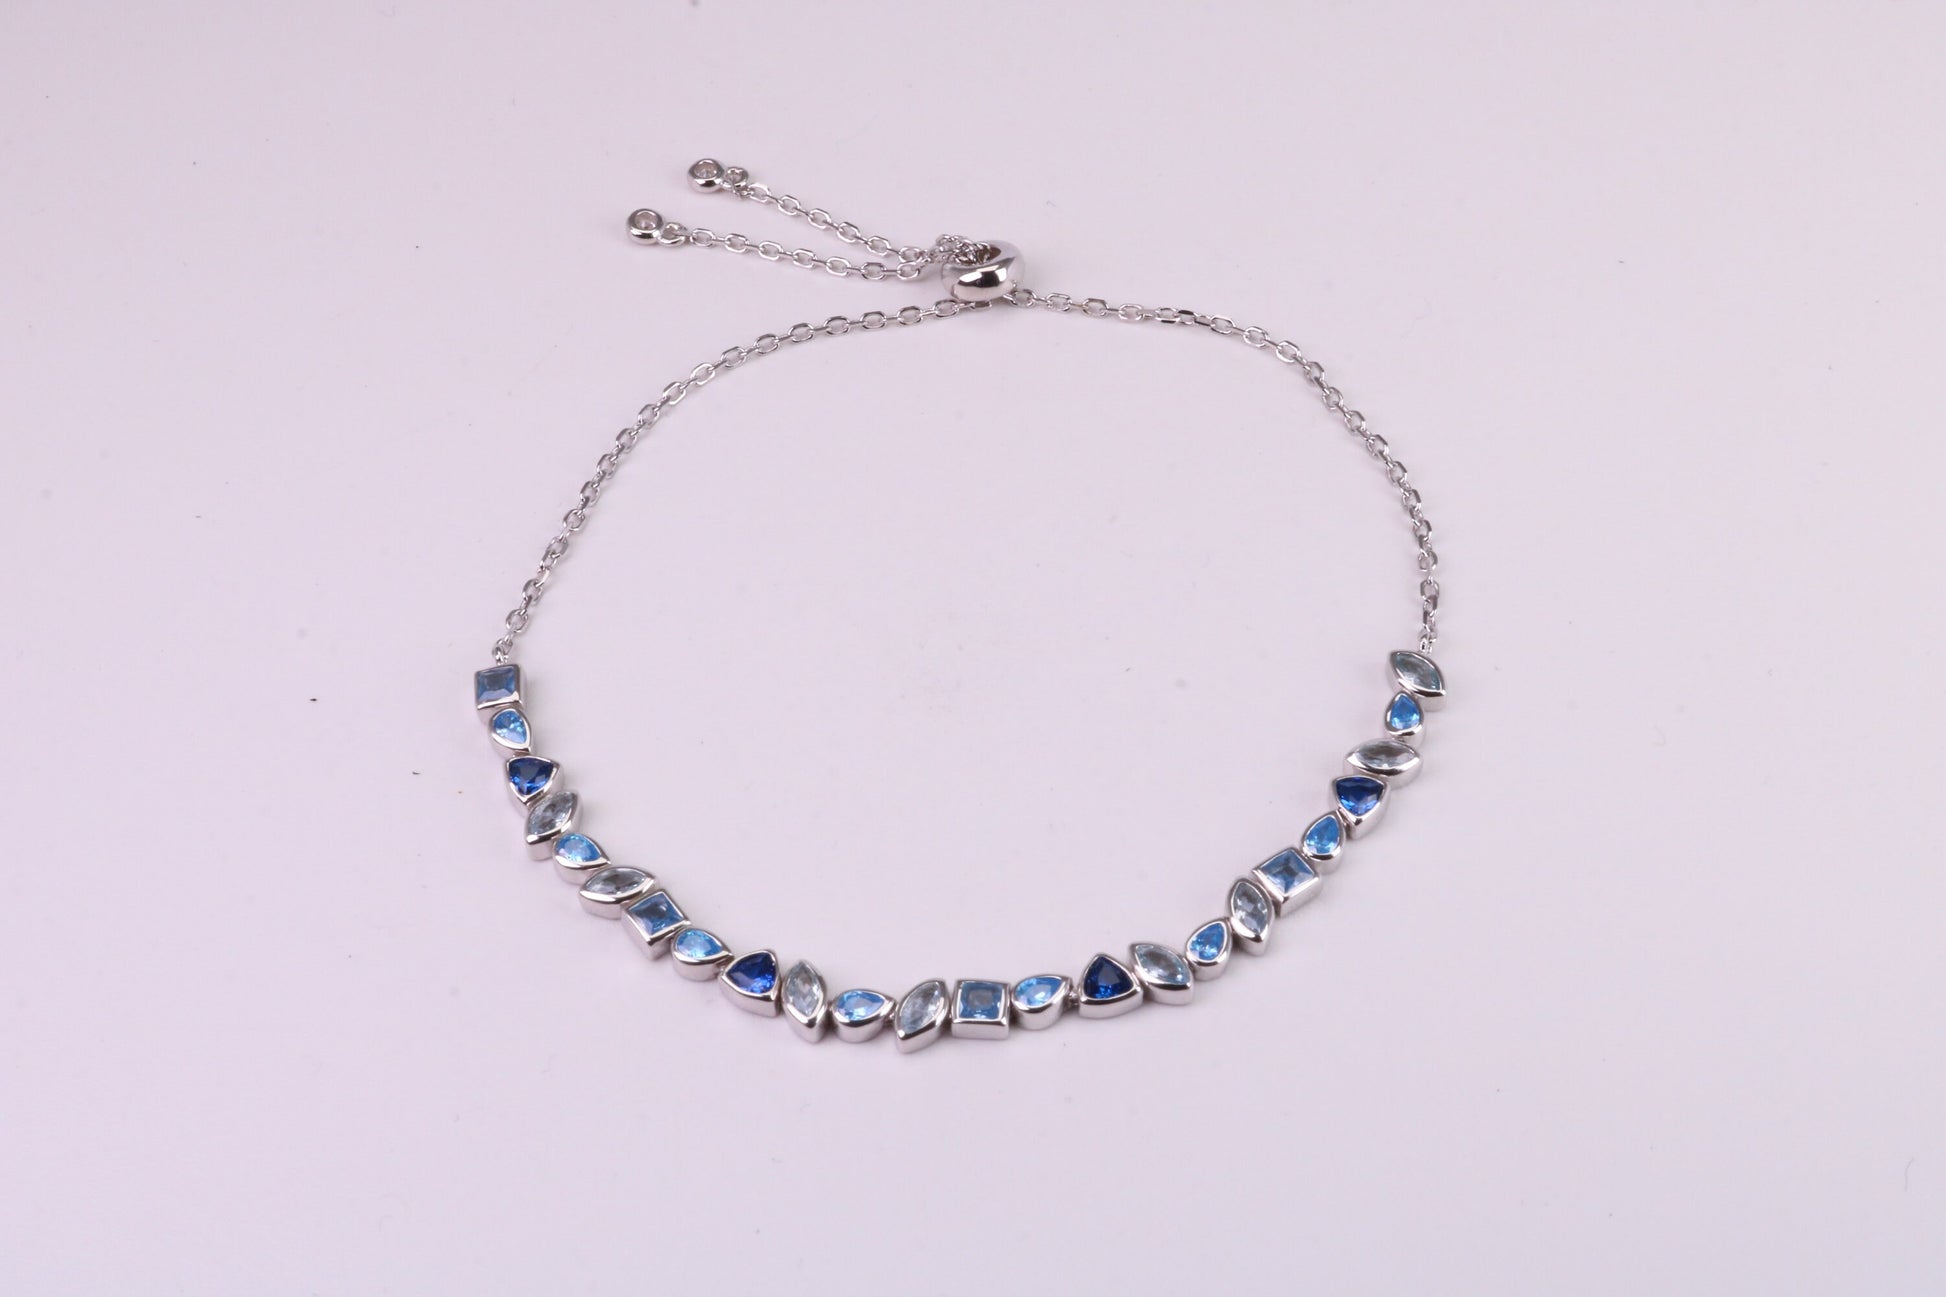 Blue Sapphire, Aquamarine and Topaz C Z Set Bracelet, Length Adjustable Chain, Made from solid Sterling Silver